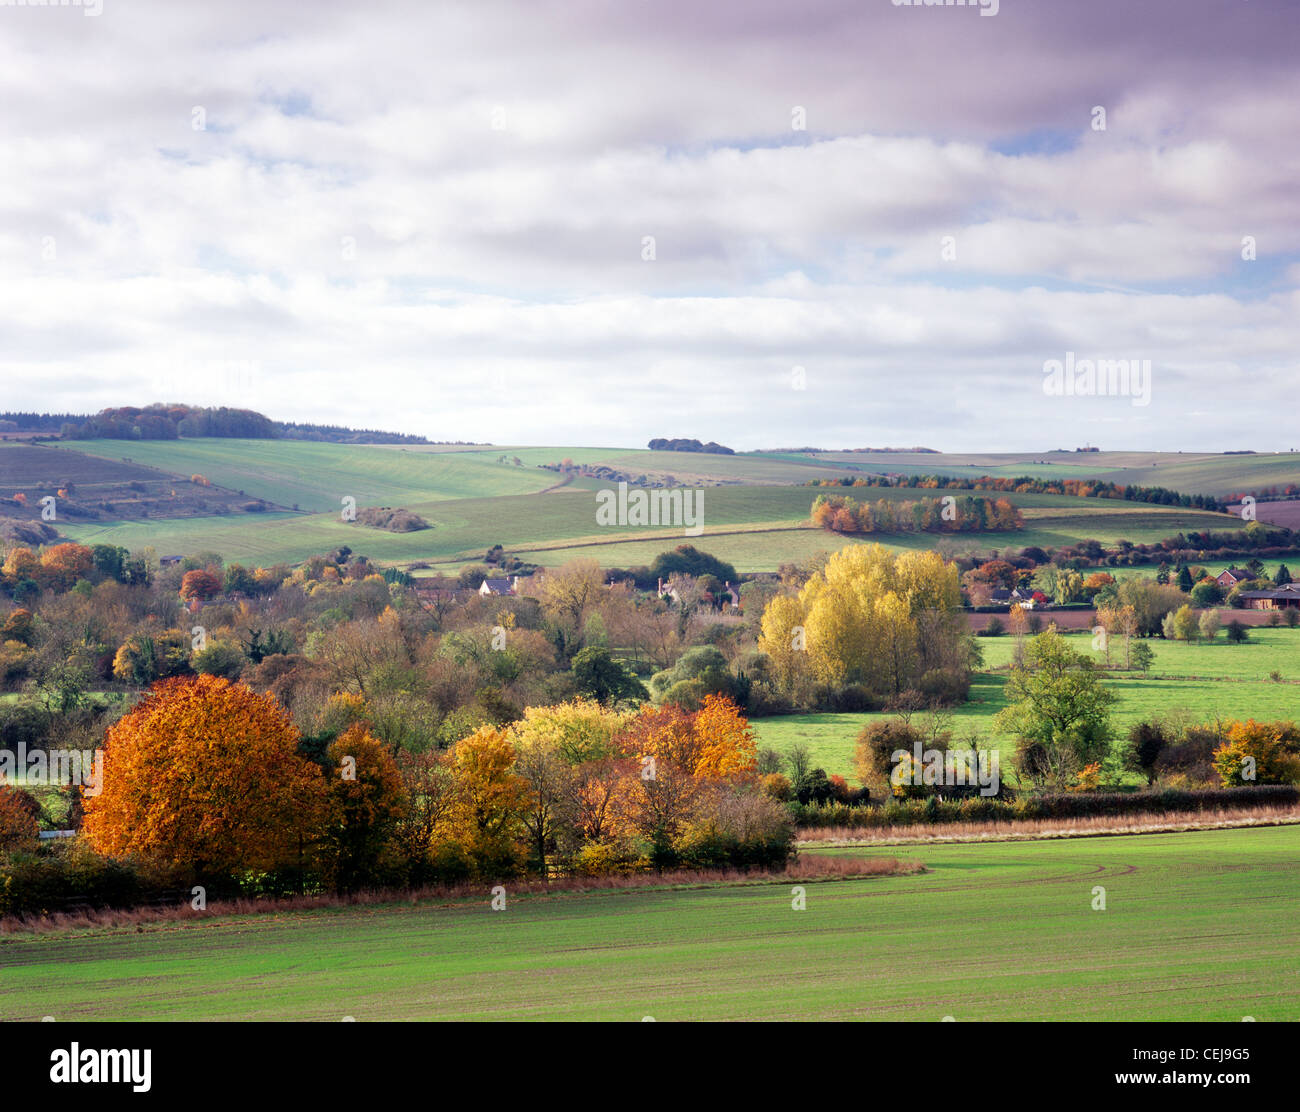 A view of the Wylye Valley in Wiltshire, England, photographed in autumn near the village of Steeple Langford. Stock Photo